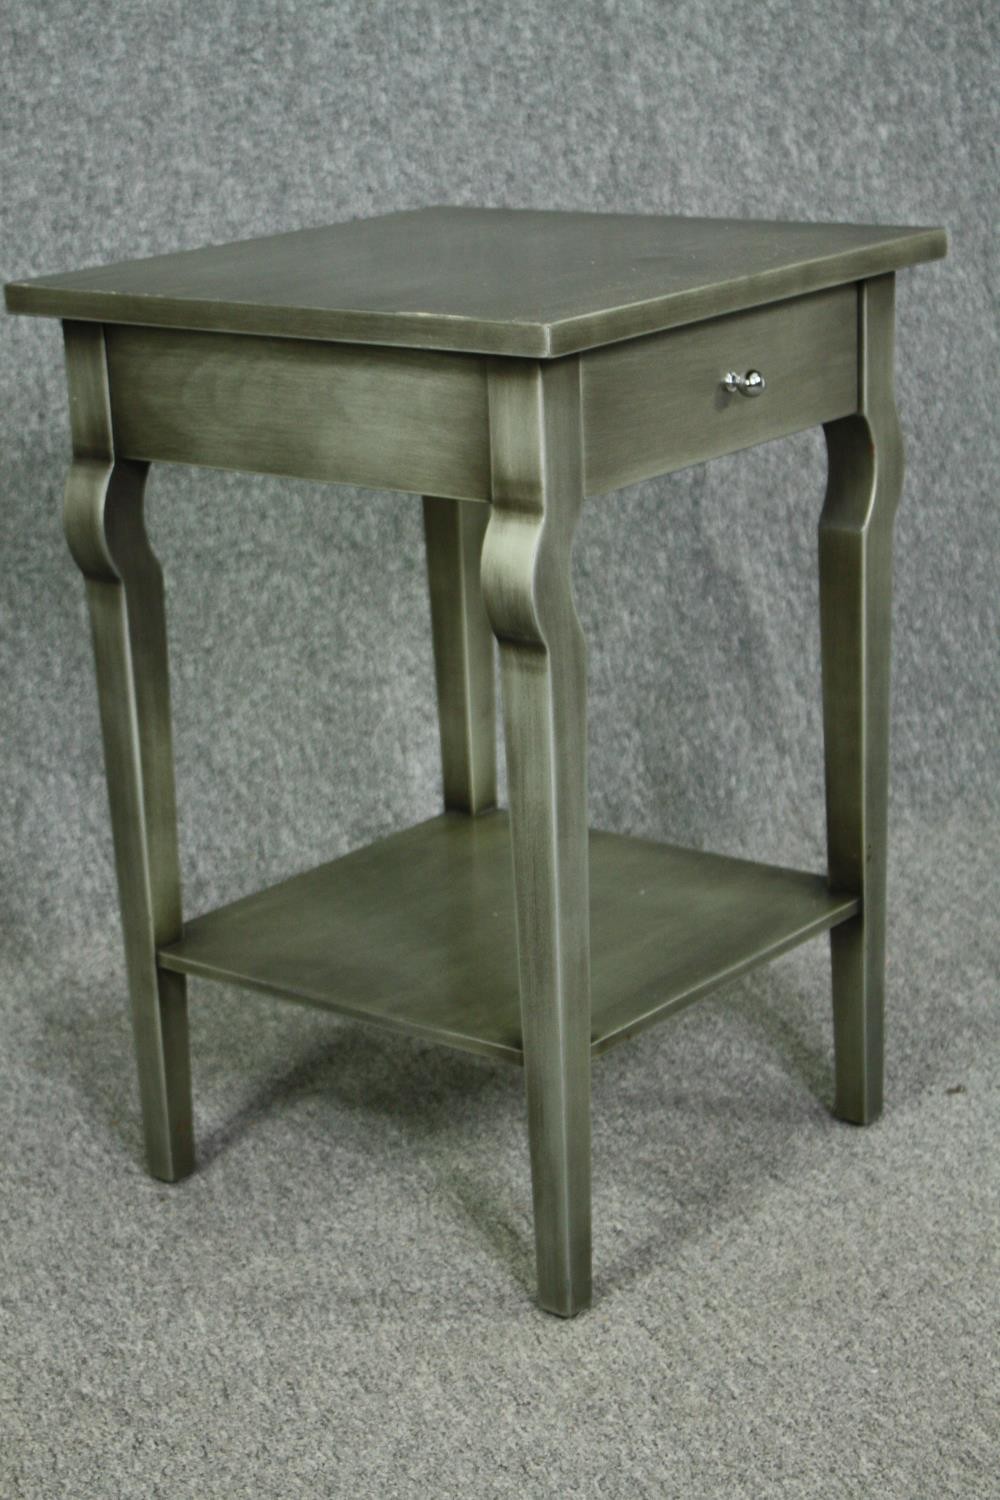 Bedside or lamp tables, a pair contemporary painted. H.66 W.45 D.45cm. (each) - Image 3 of 6